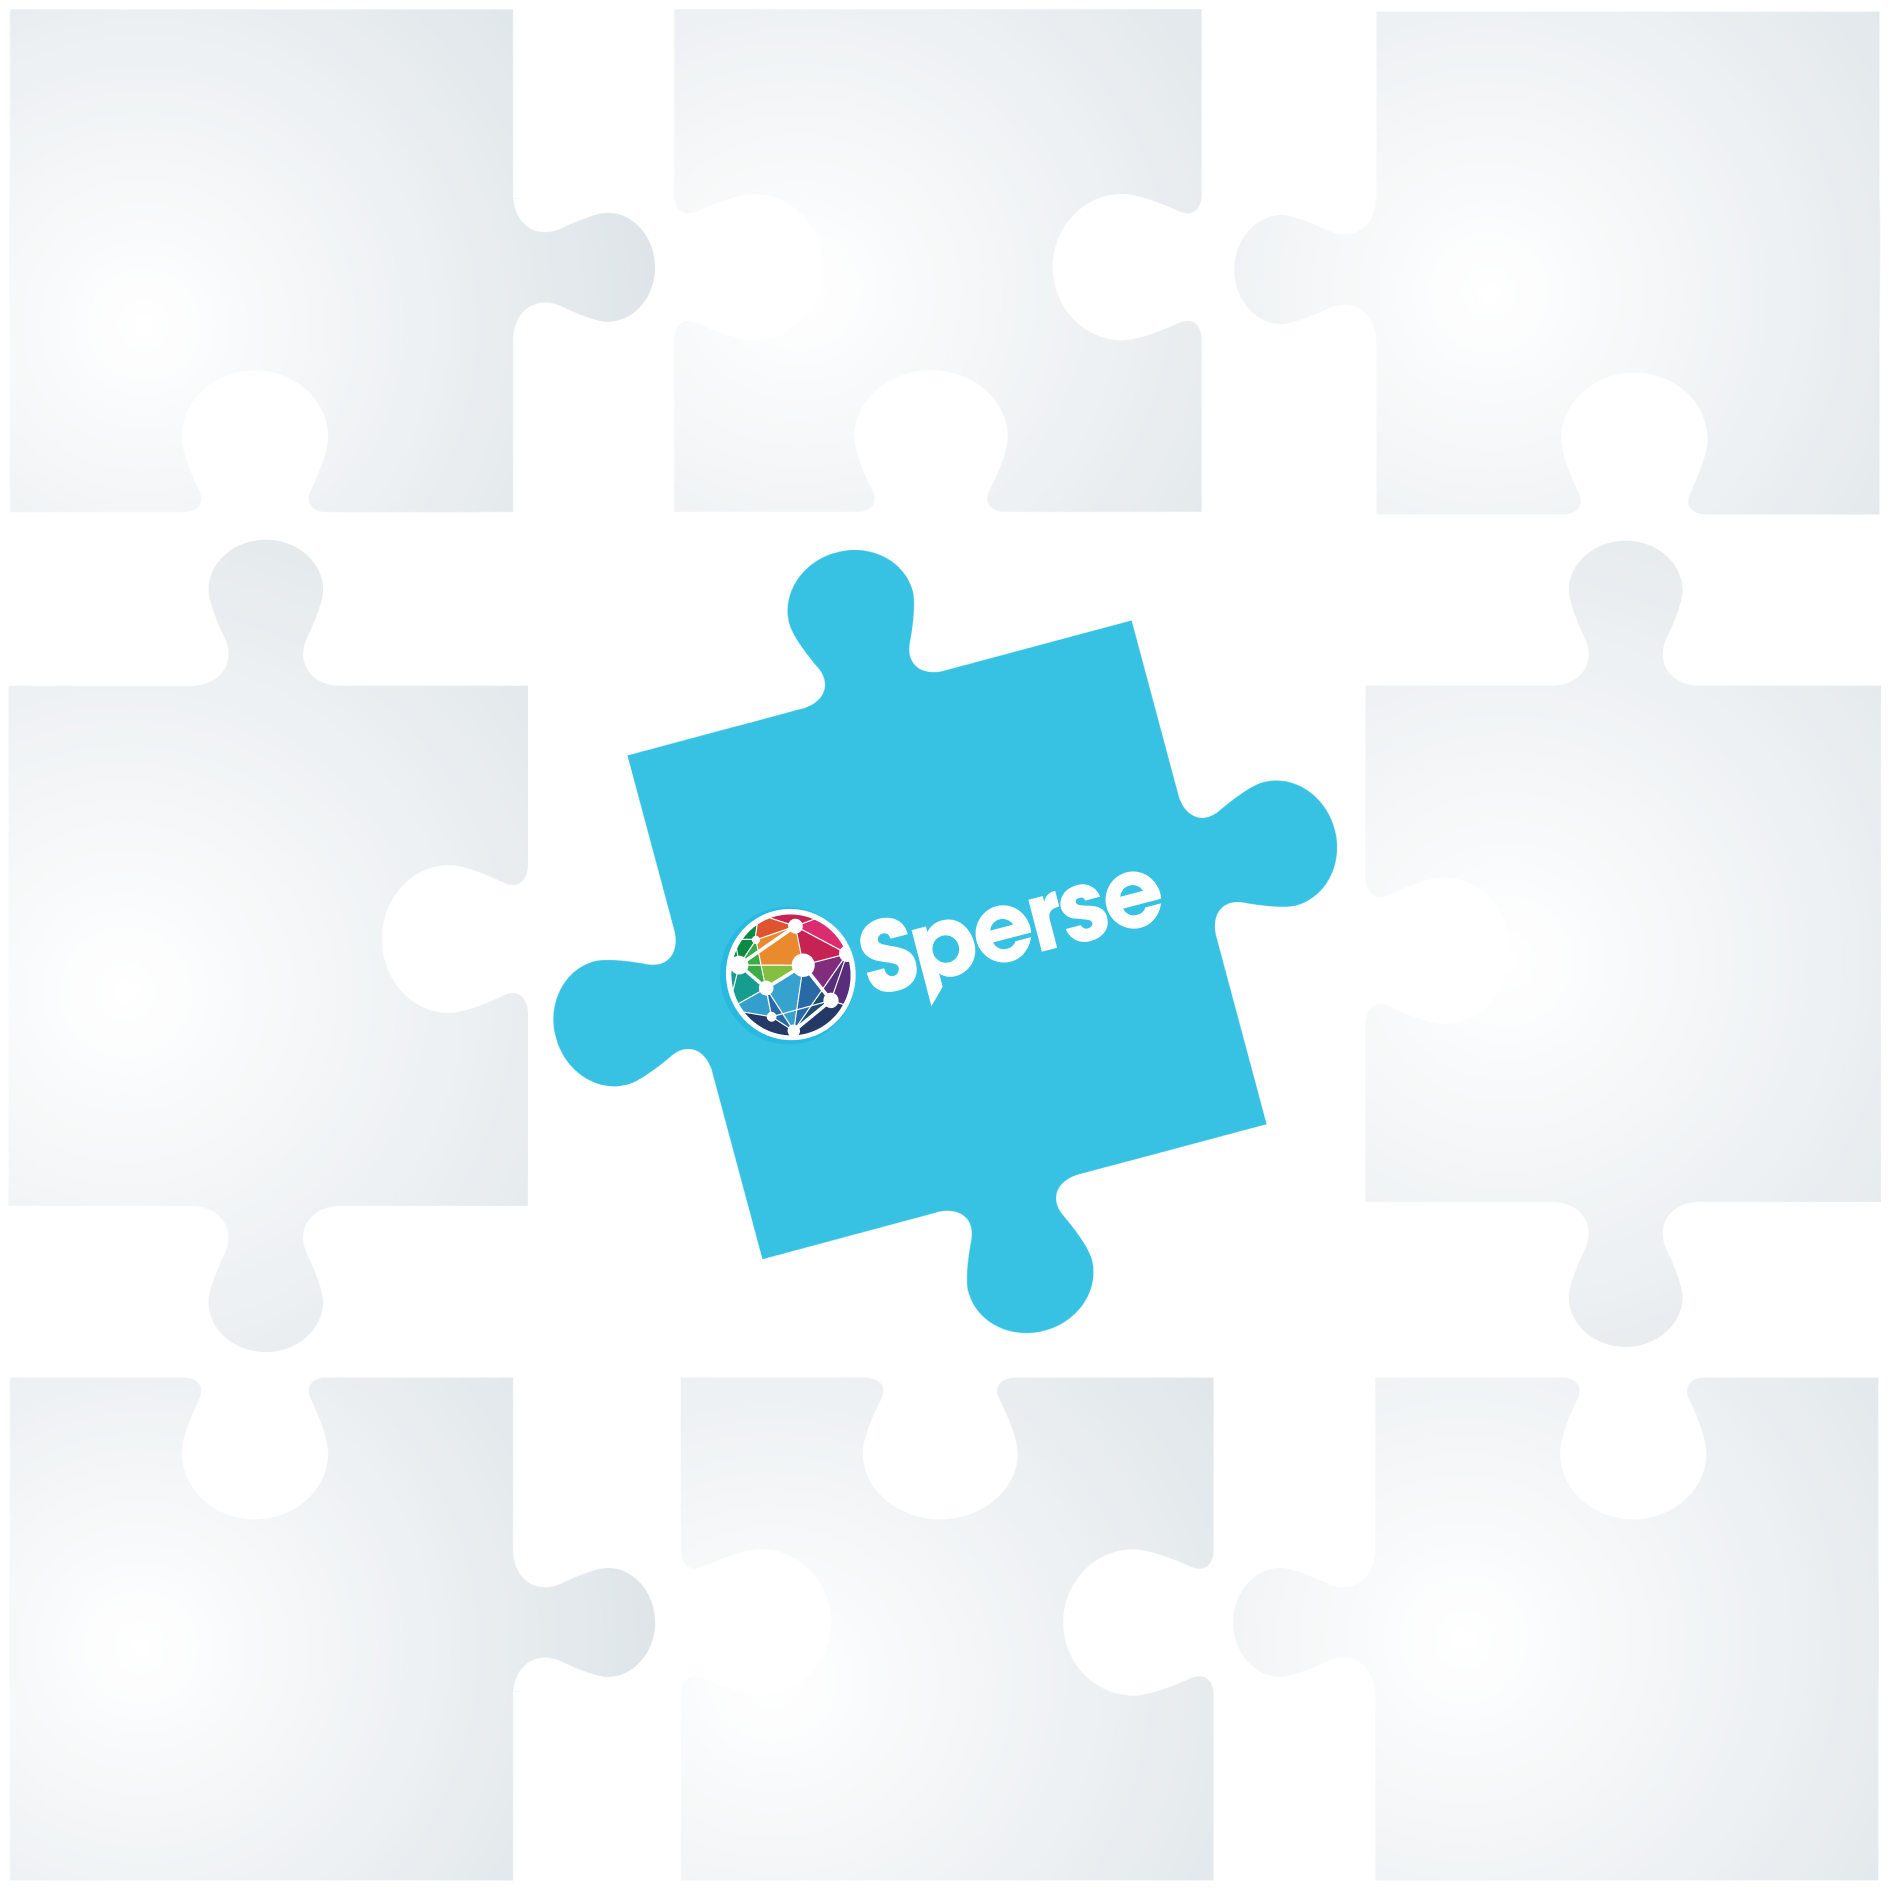 Sperse is the critical missing piece to solve your growth puzzle.